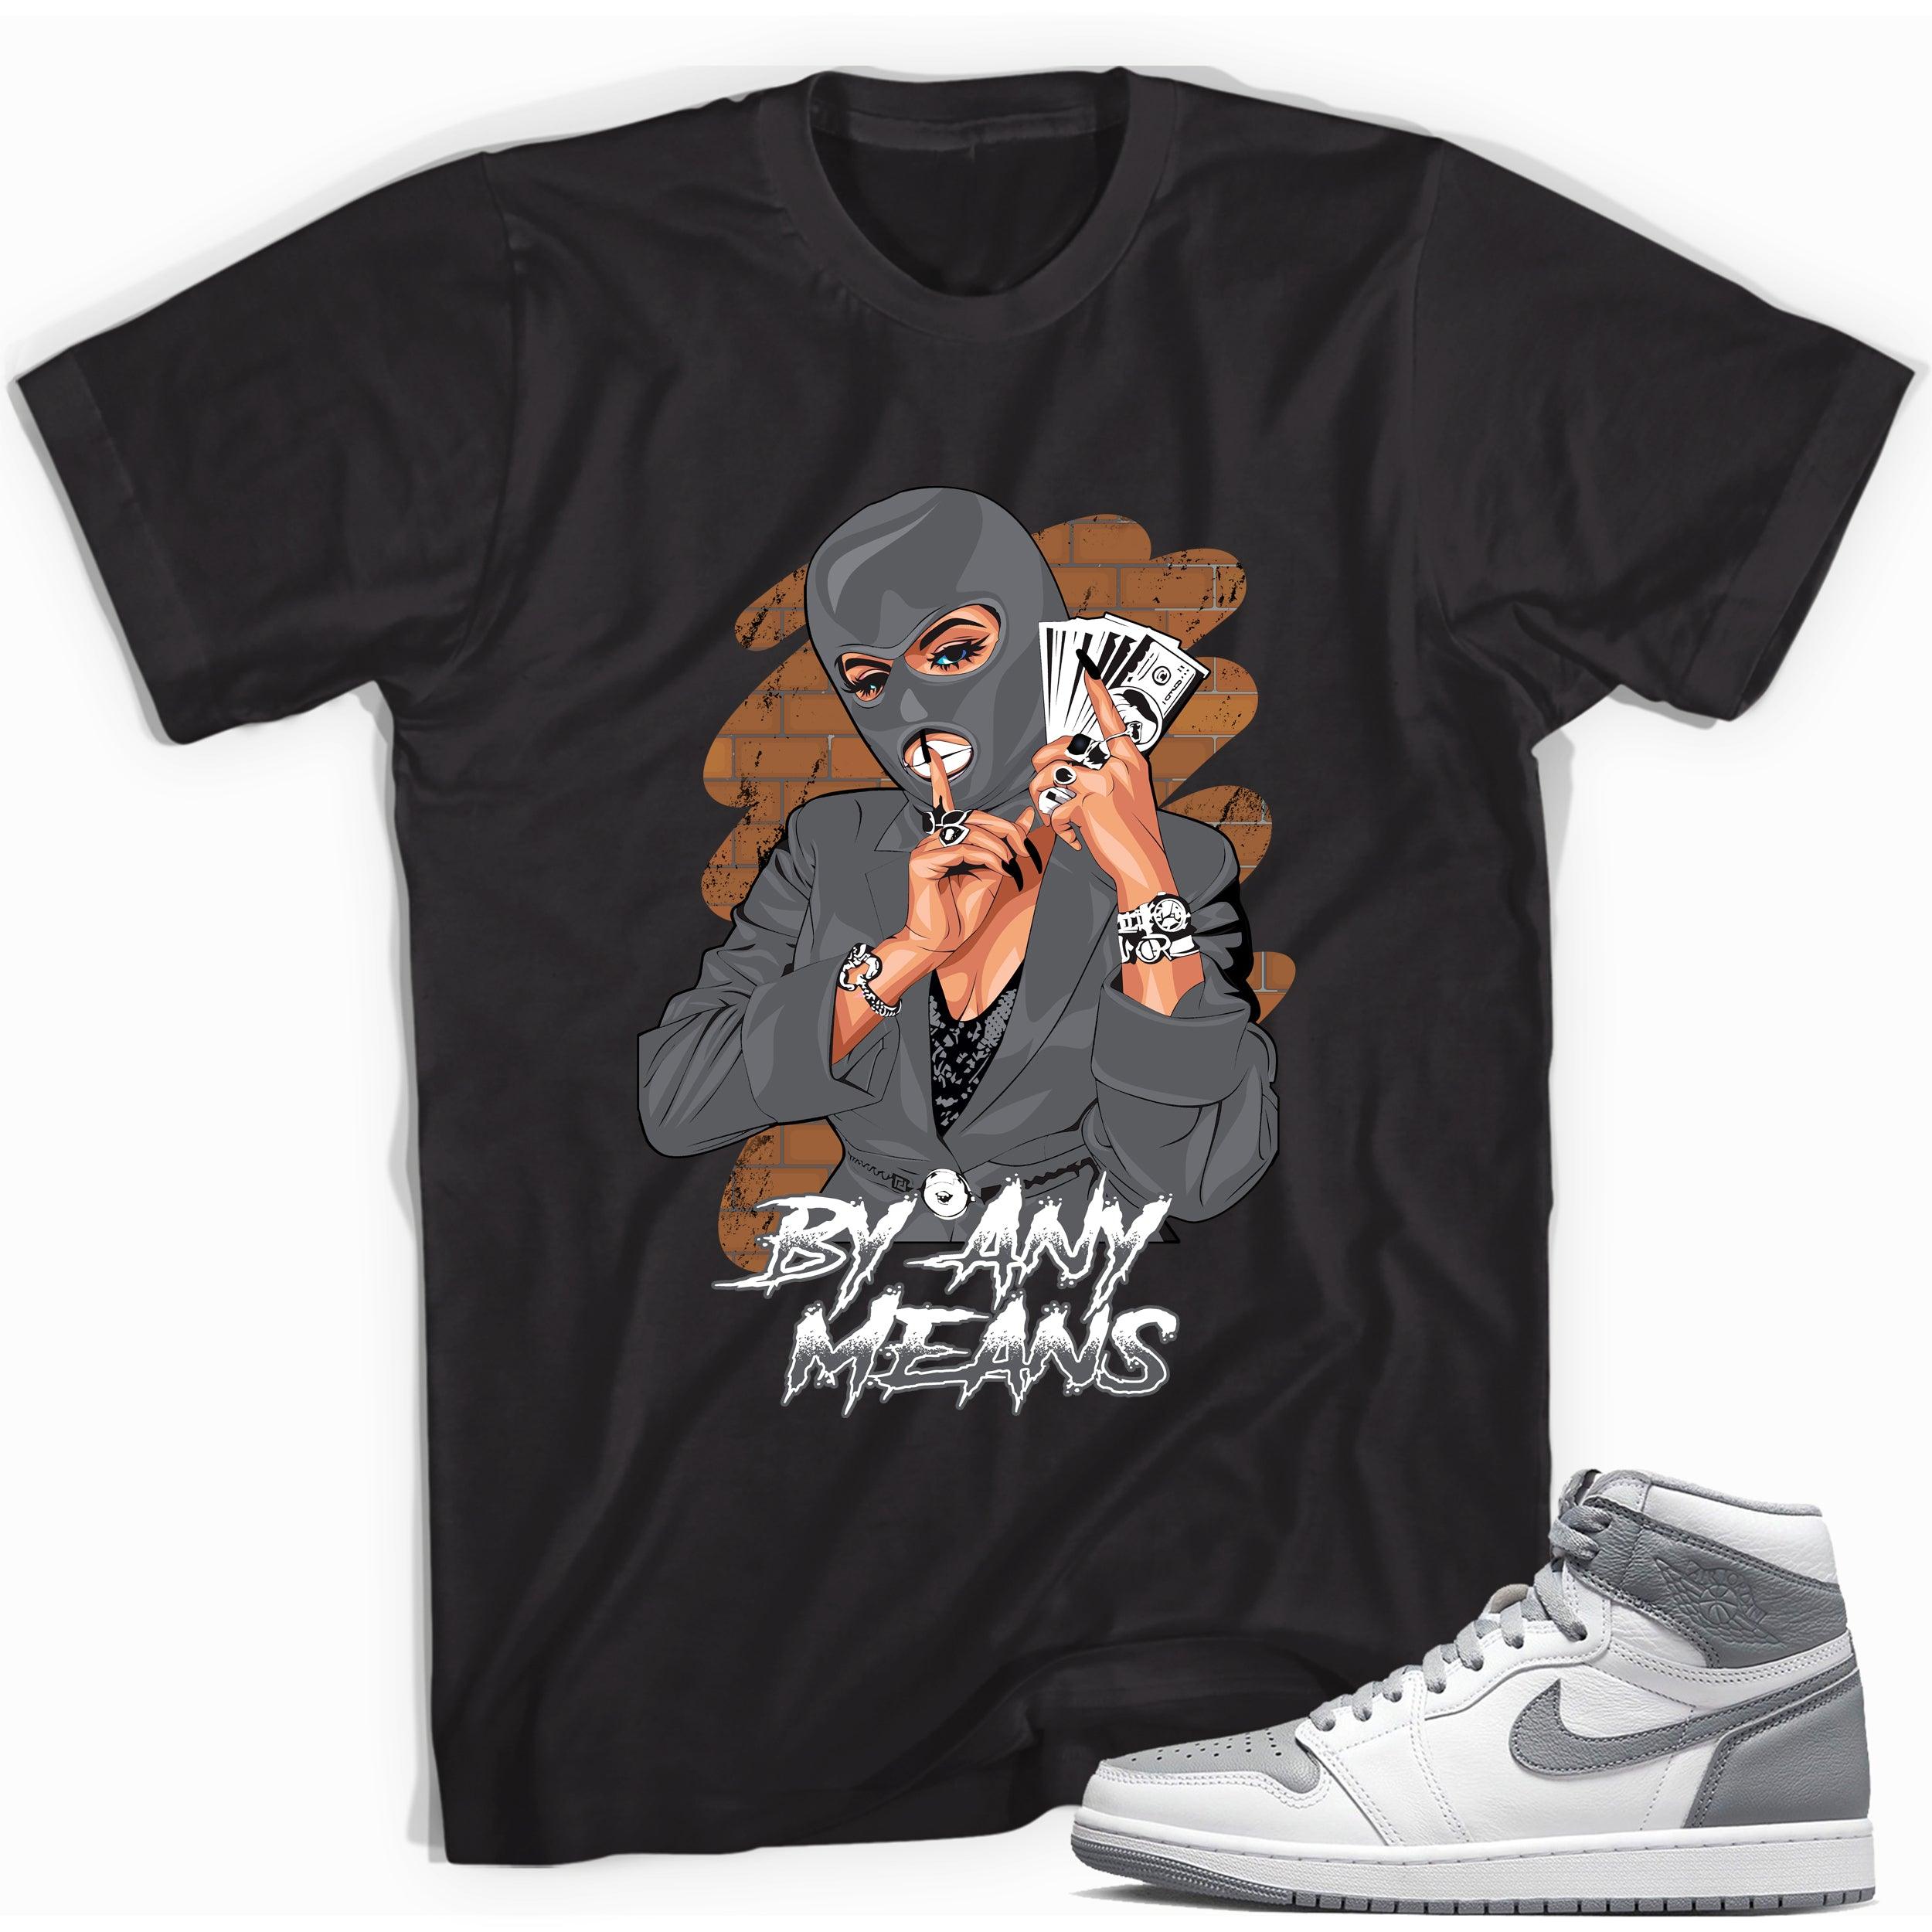 Jordan 1s High OG Stealth Shirt - By Any Means - Sneaker Shirts Outlet